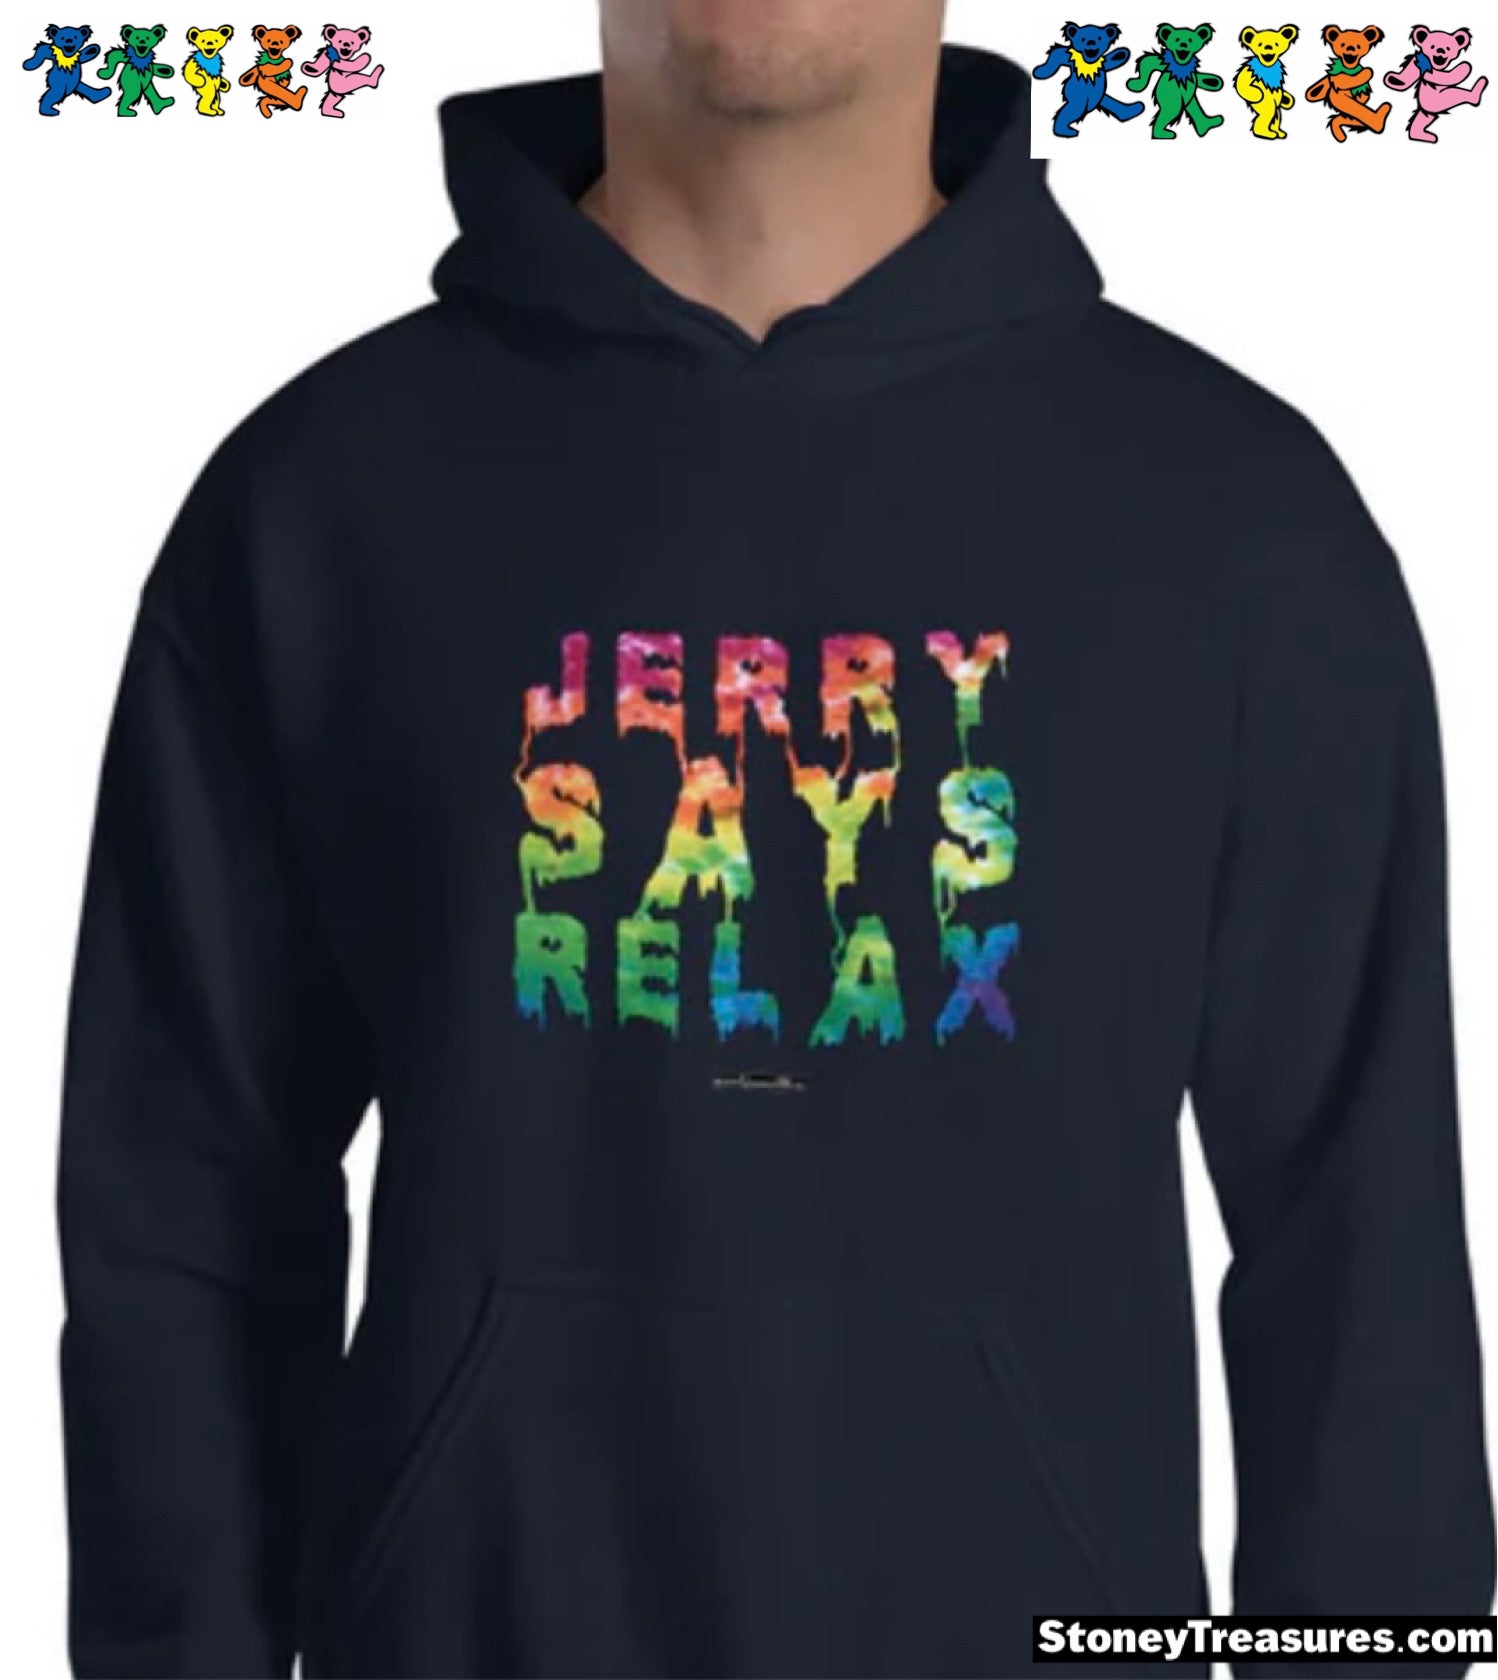 Jerry Says Relax, for Jerry Garcia fans